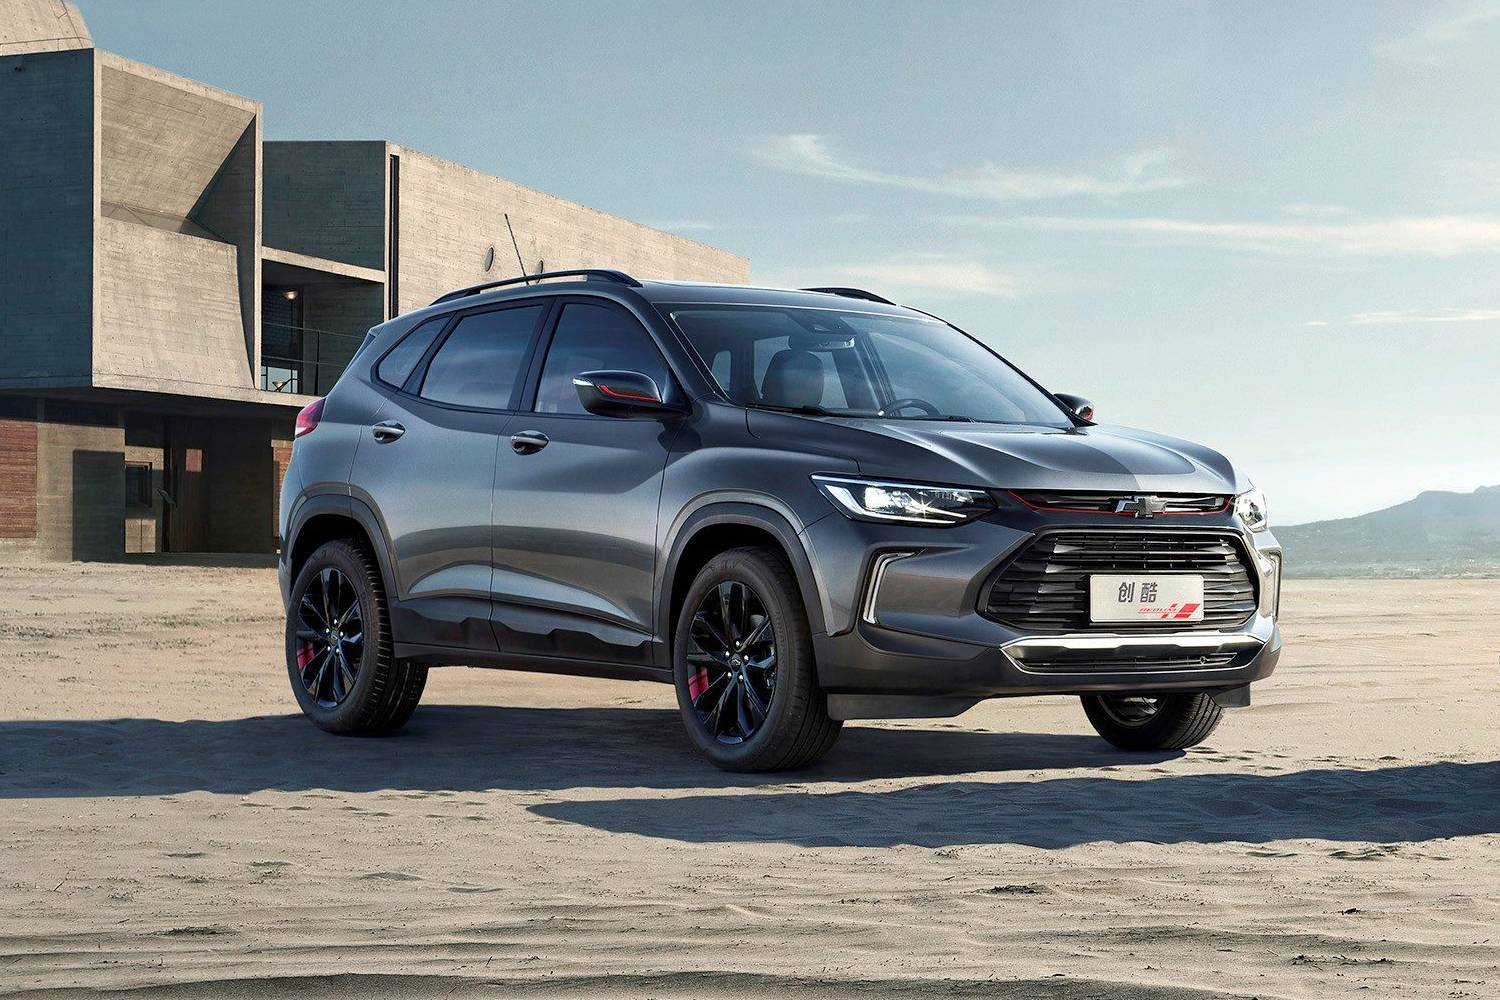 2020 Chevrolet Tracker Launched In China With $14,500 Base Price | Carscoops